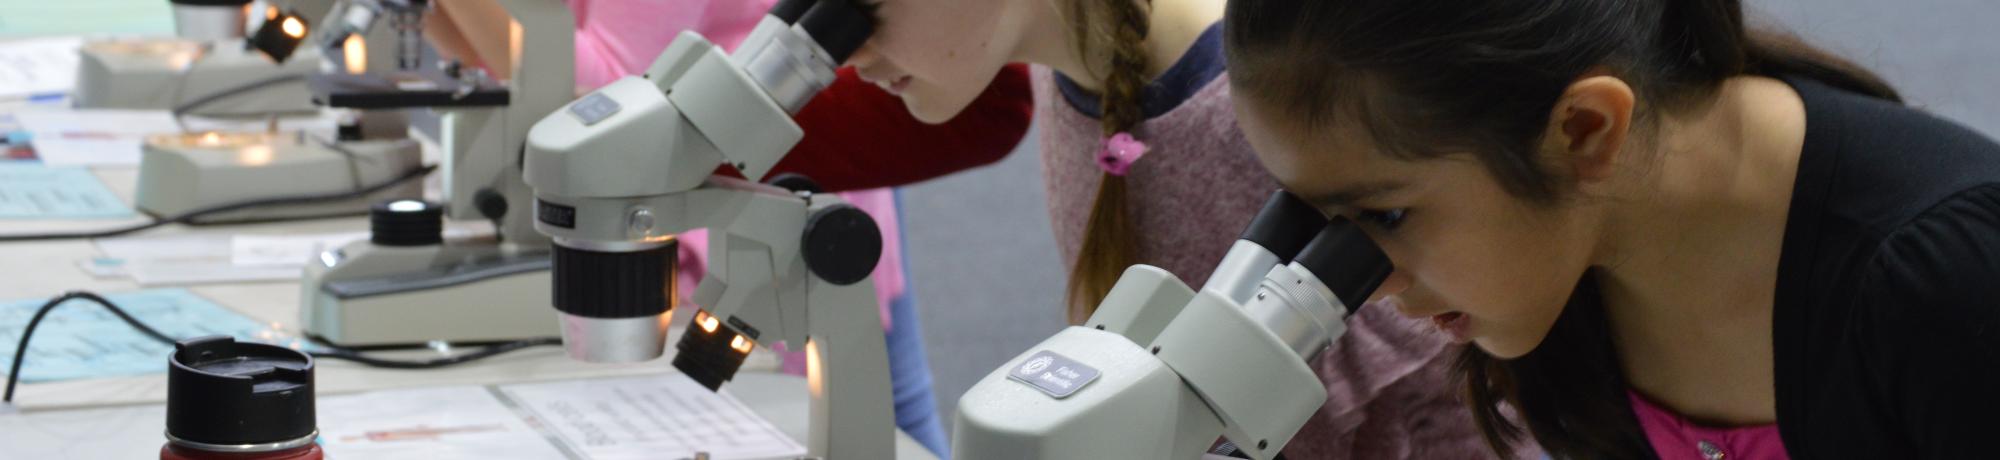 Microscope use at the Science Expo 2018